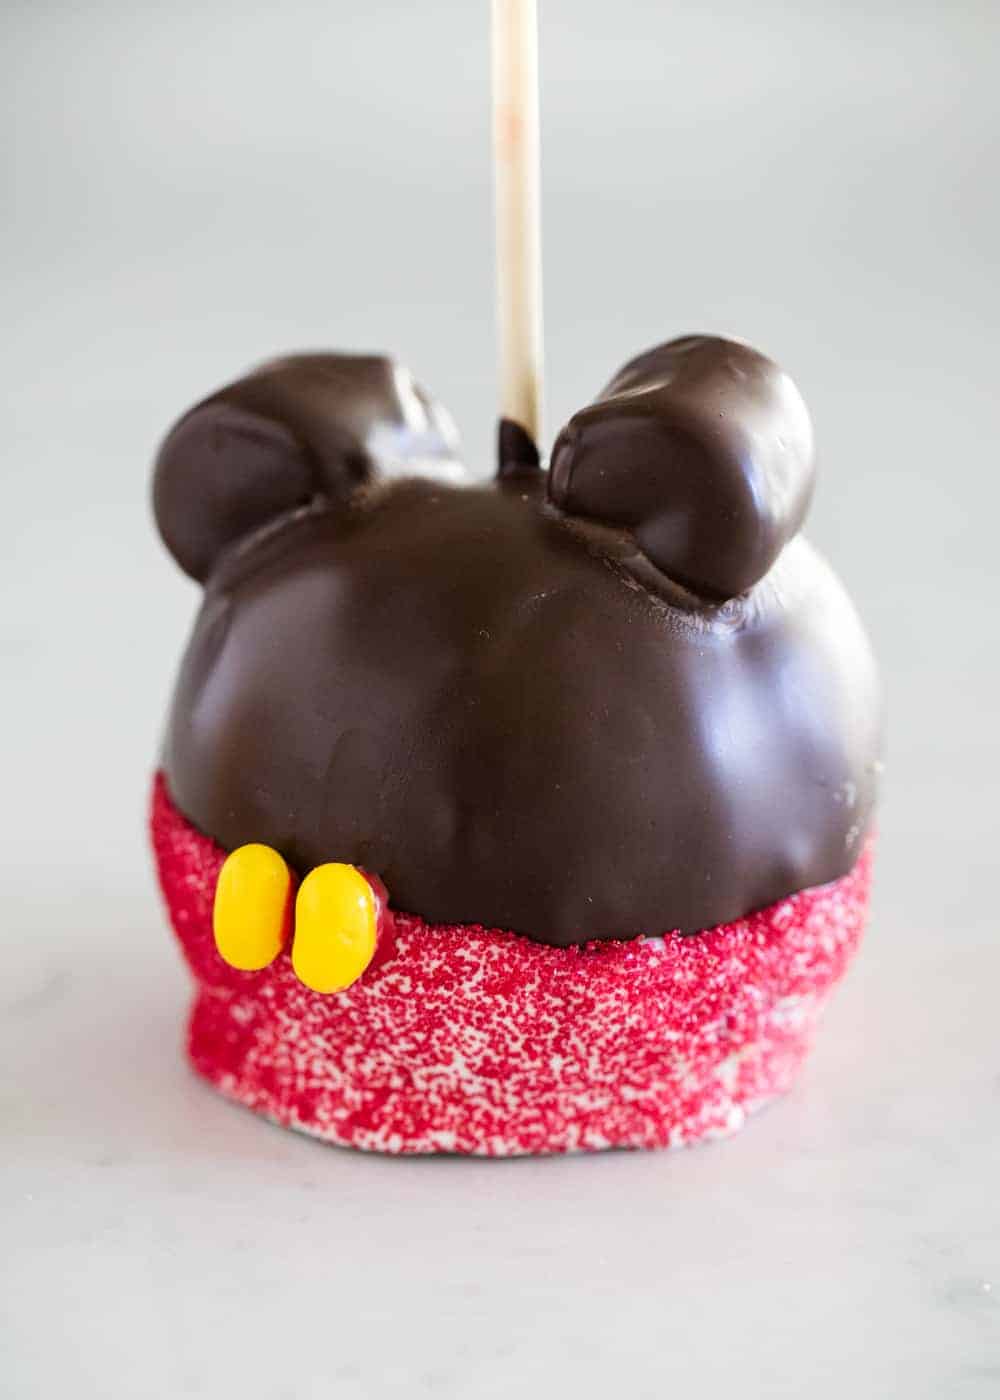 Mickey mouse candy apples.